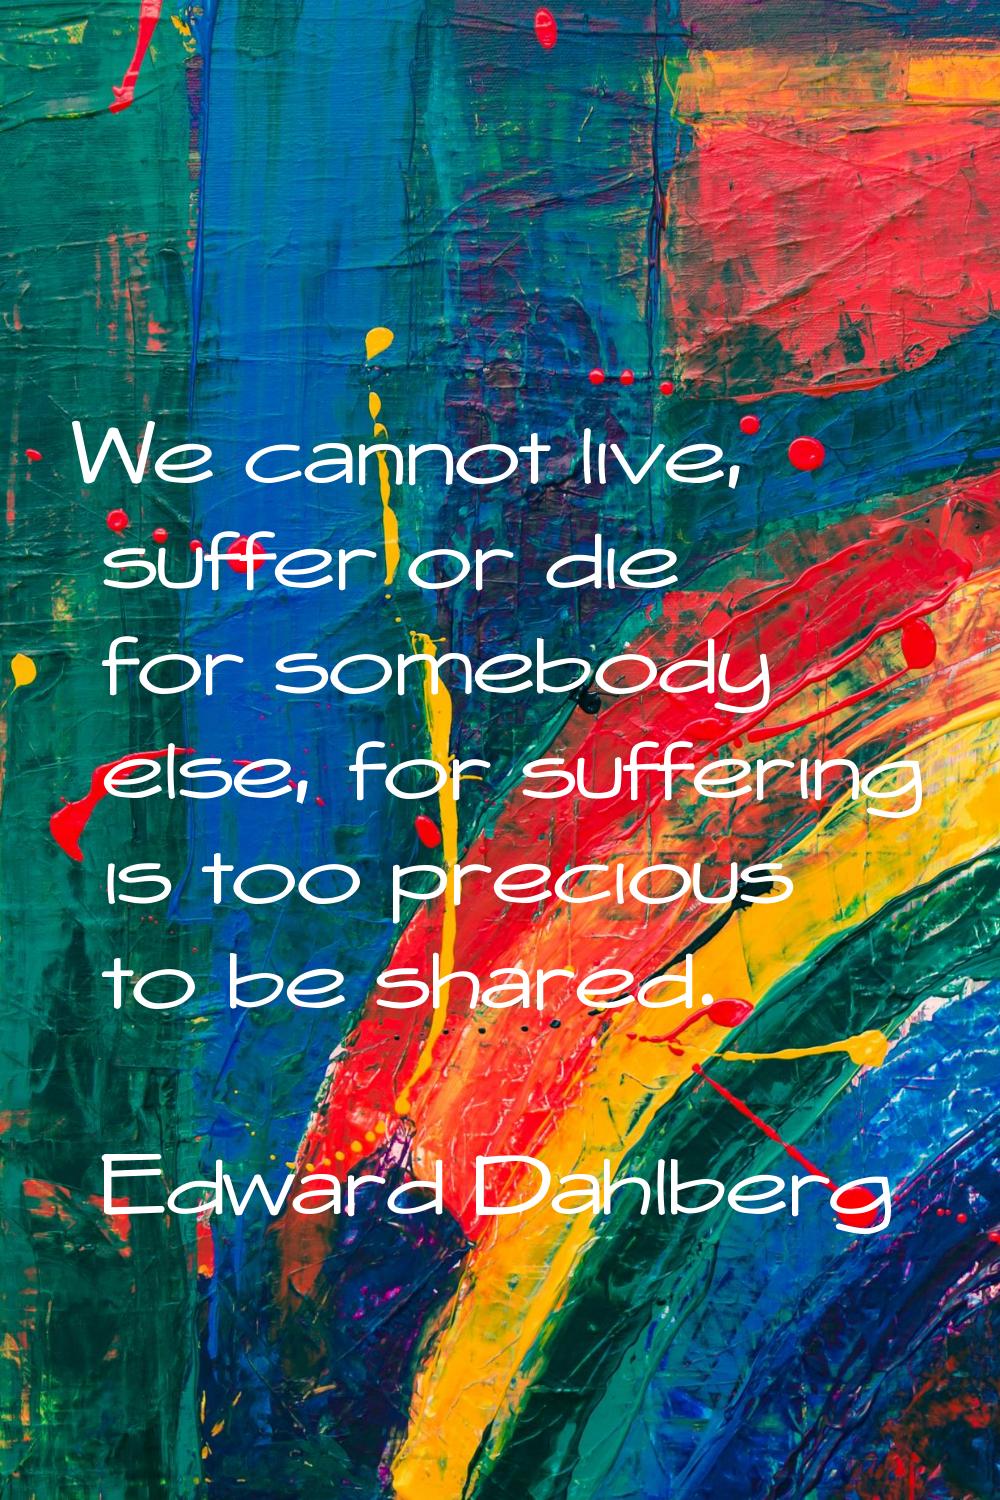 We cannot live, suffer or die for somebody else, for suffering is too precious to be shared.